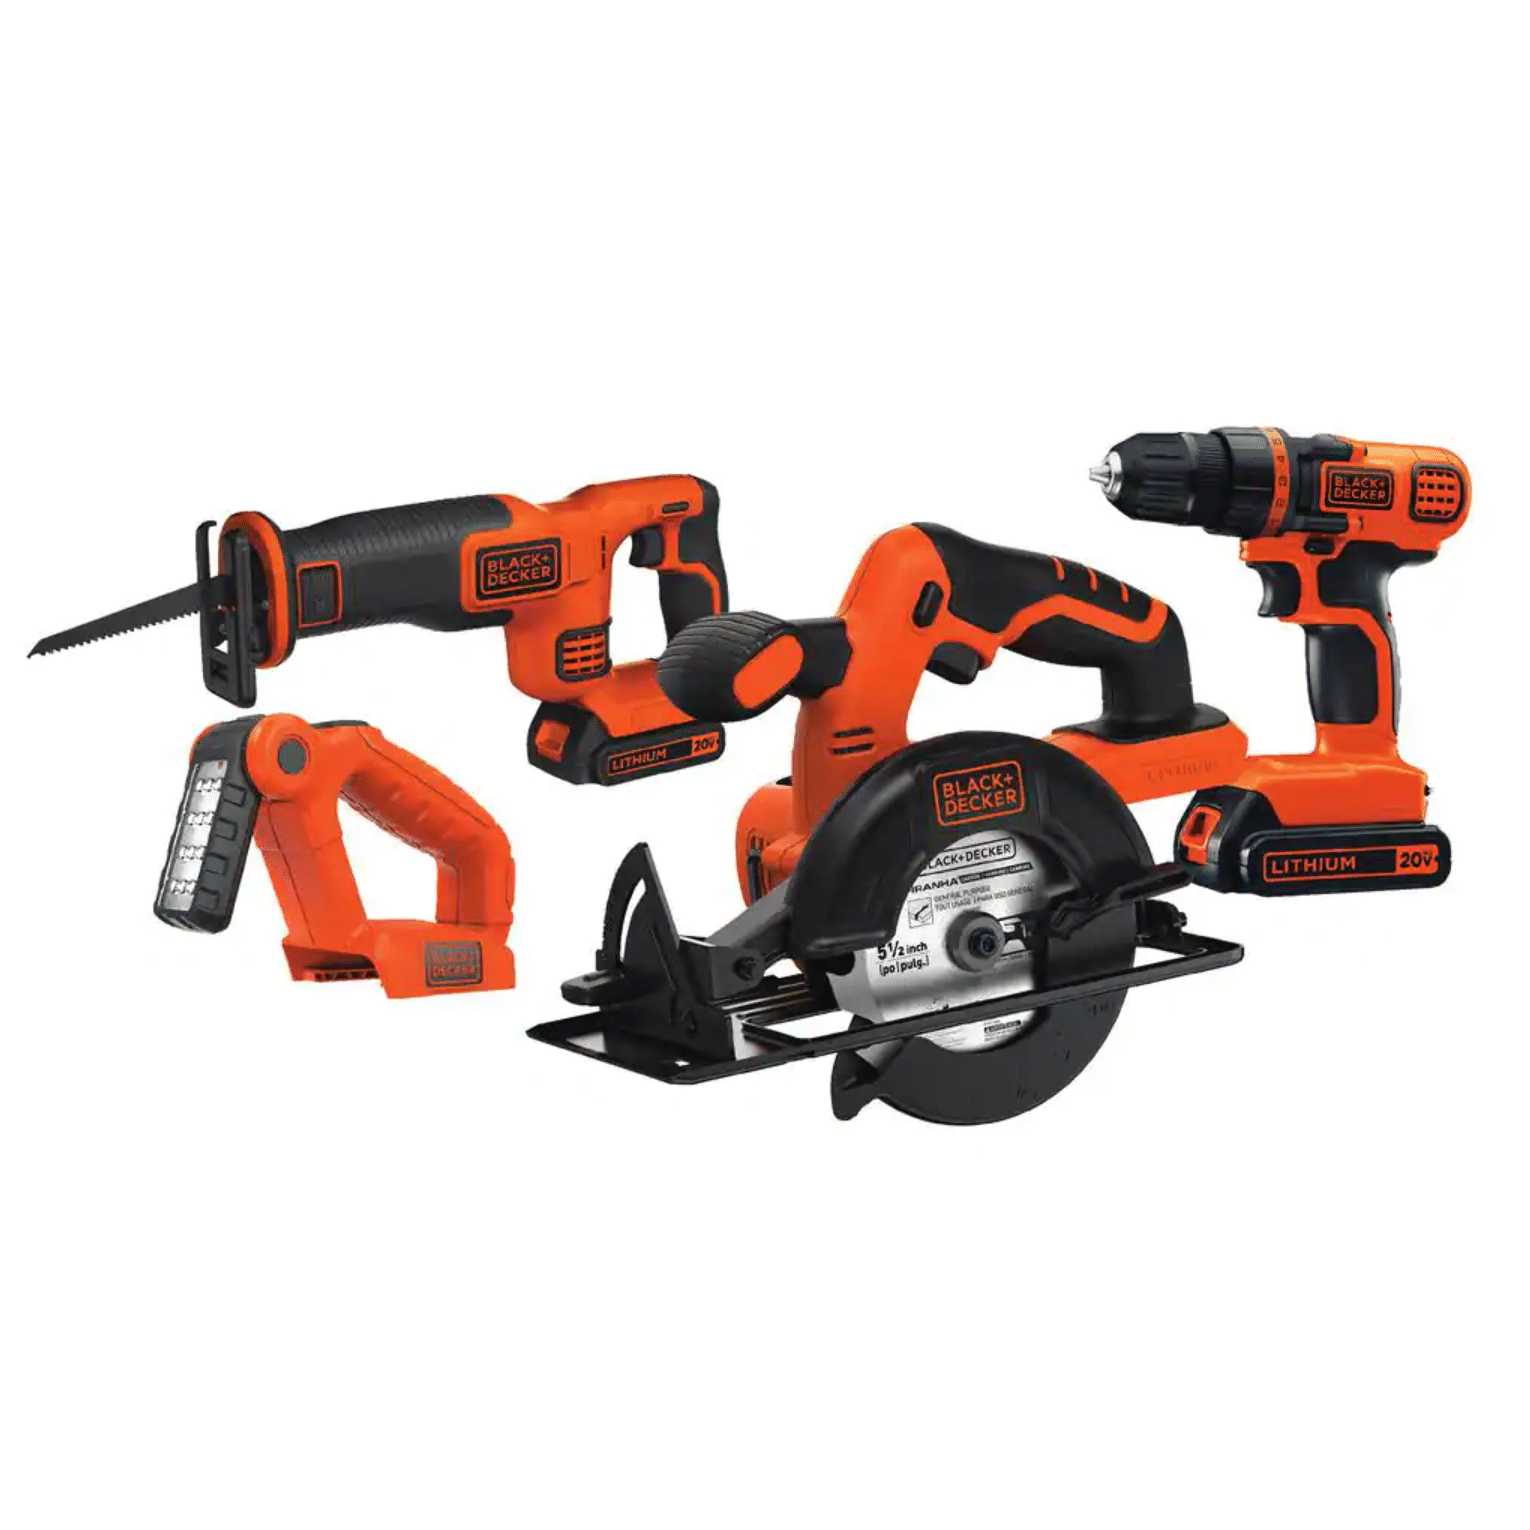 Black + Decker 20-Volt Max Lithium-Ion Cordless Combo Kit (4-Tool) with (2) Batteries 1.5Ah & Charger (BD4KITCDCRL)